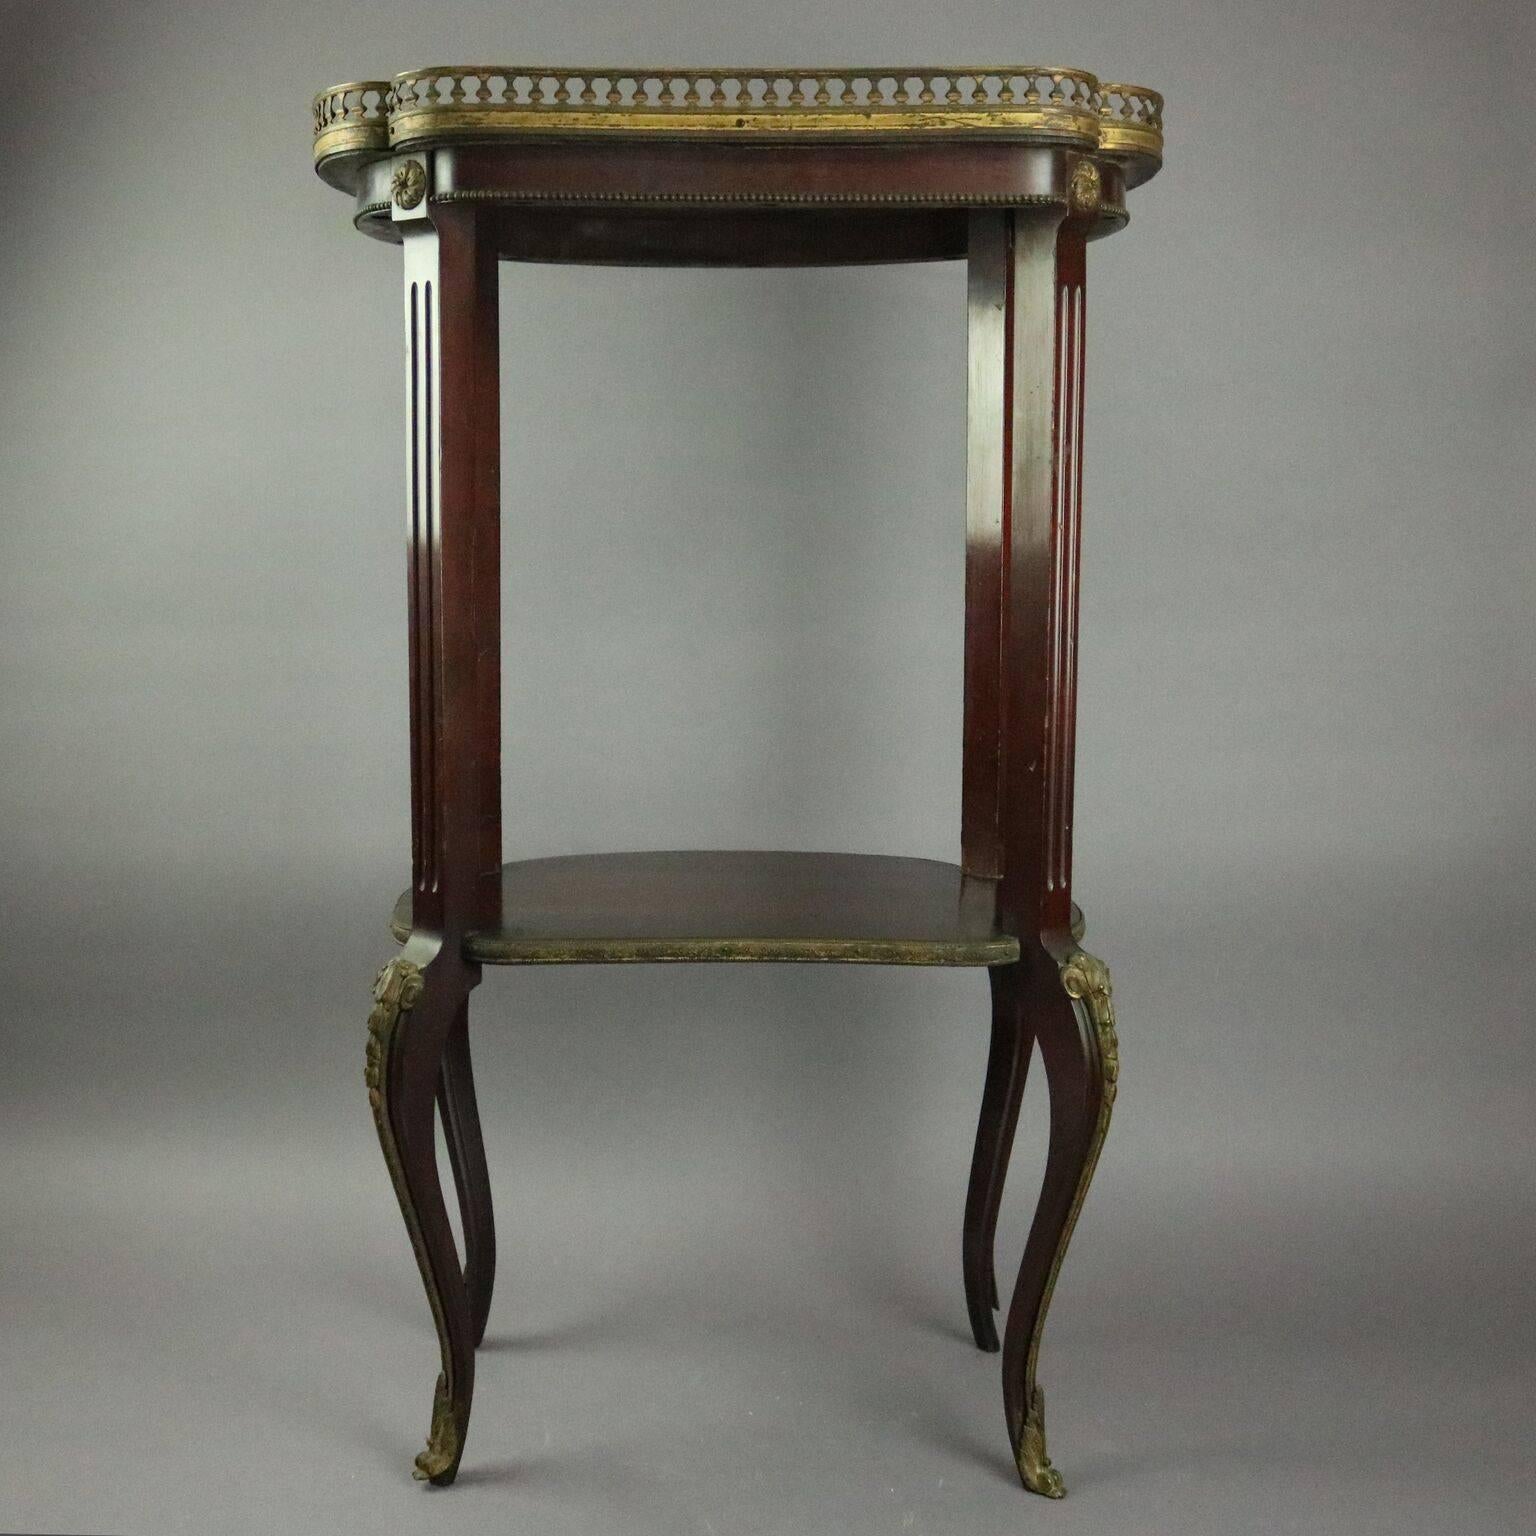 20th Century Antique French Louis XIV Style Mahogany and Ormolu Sculpture Stand, circa 1900